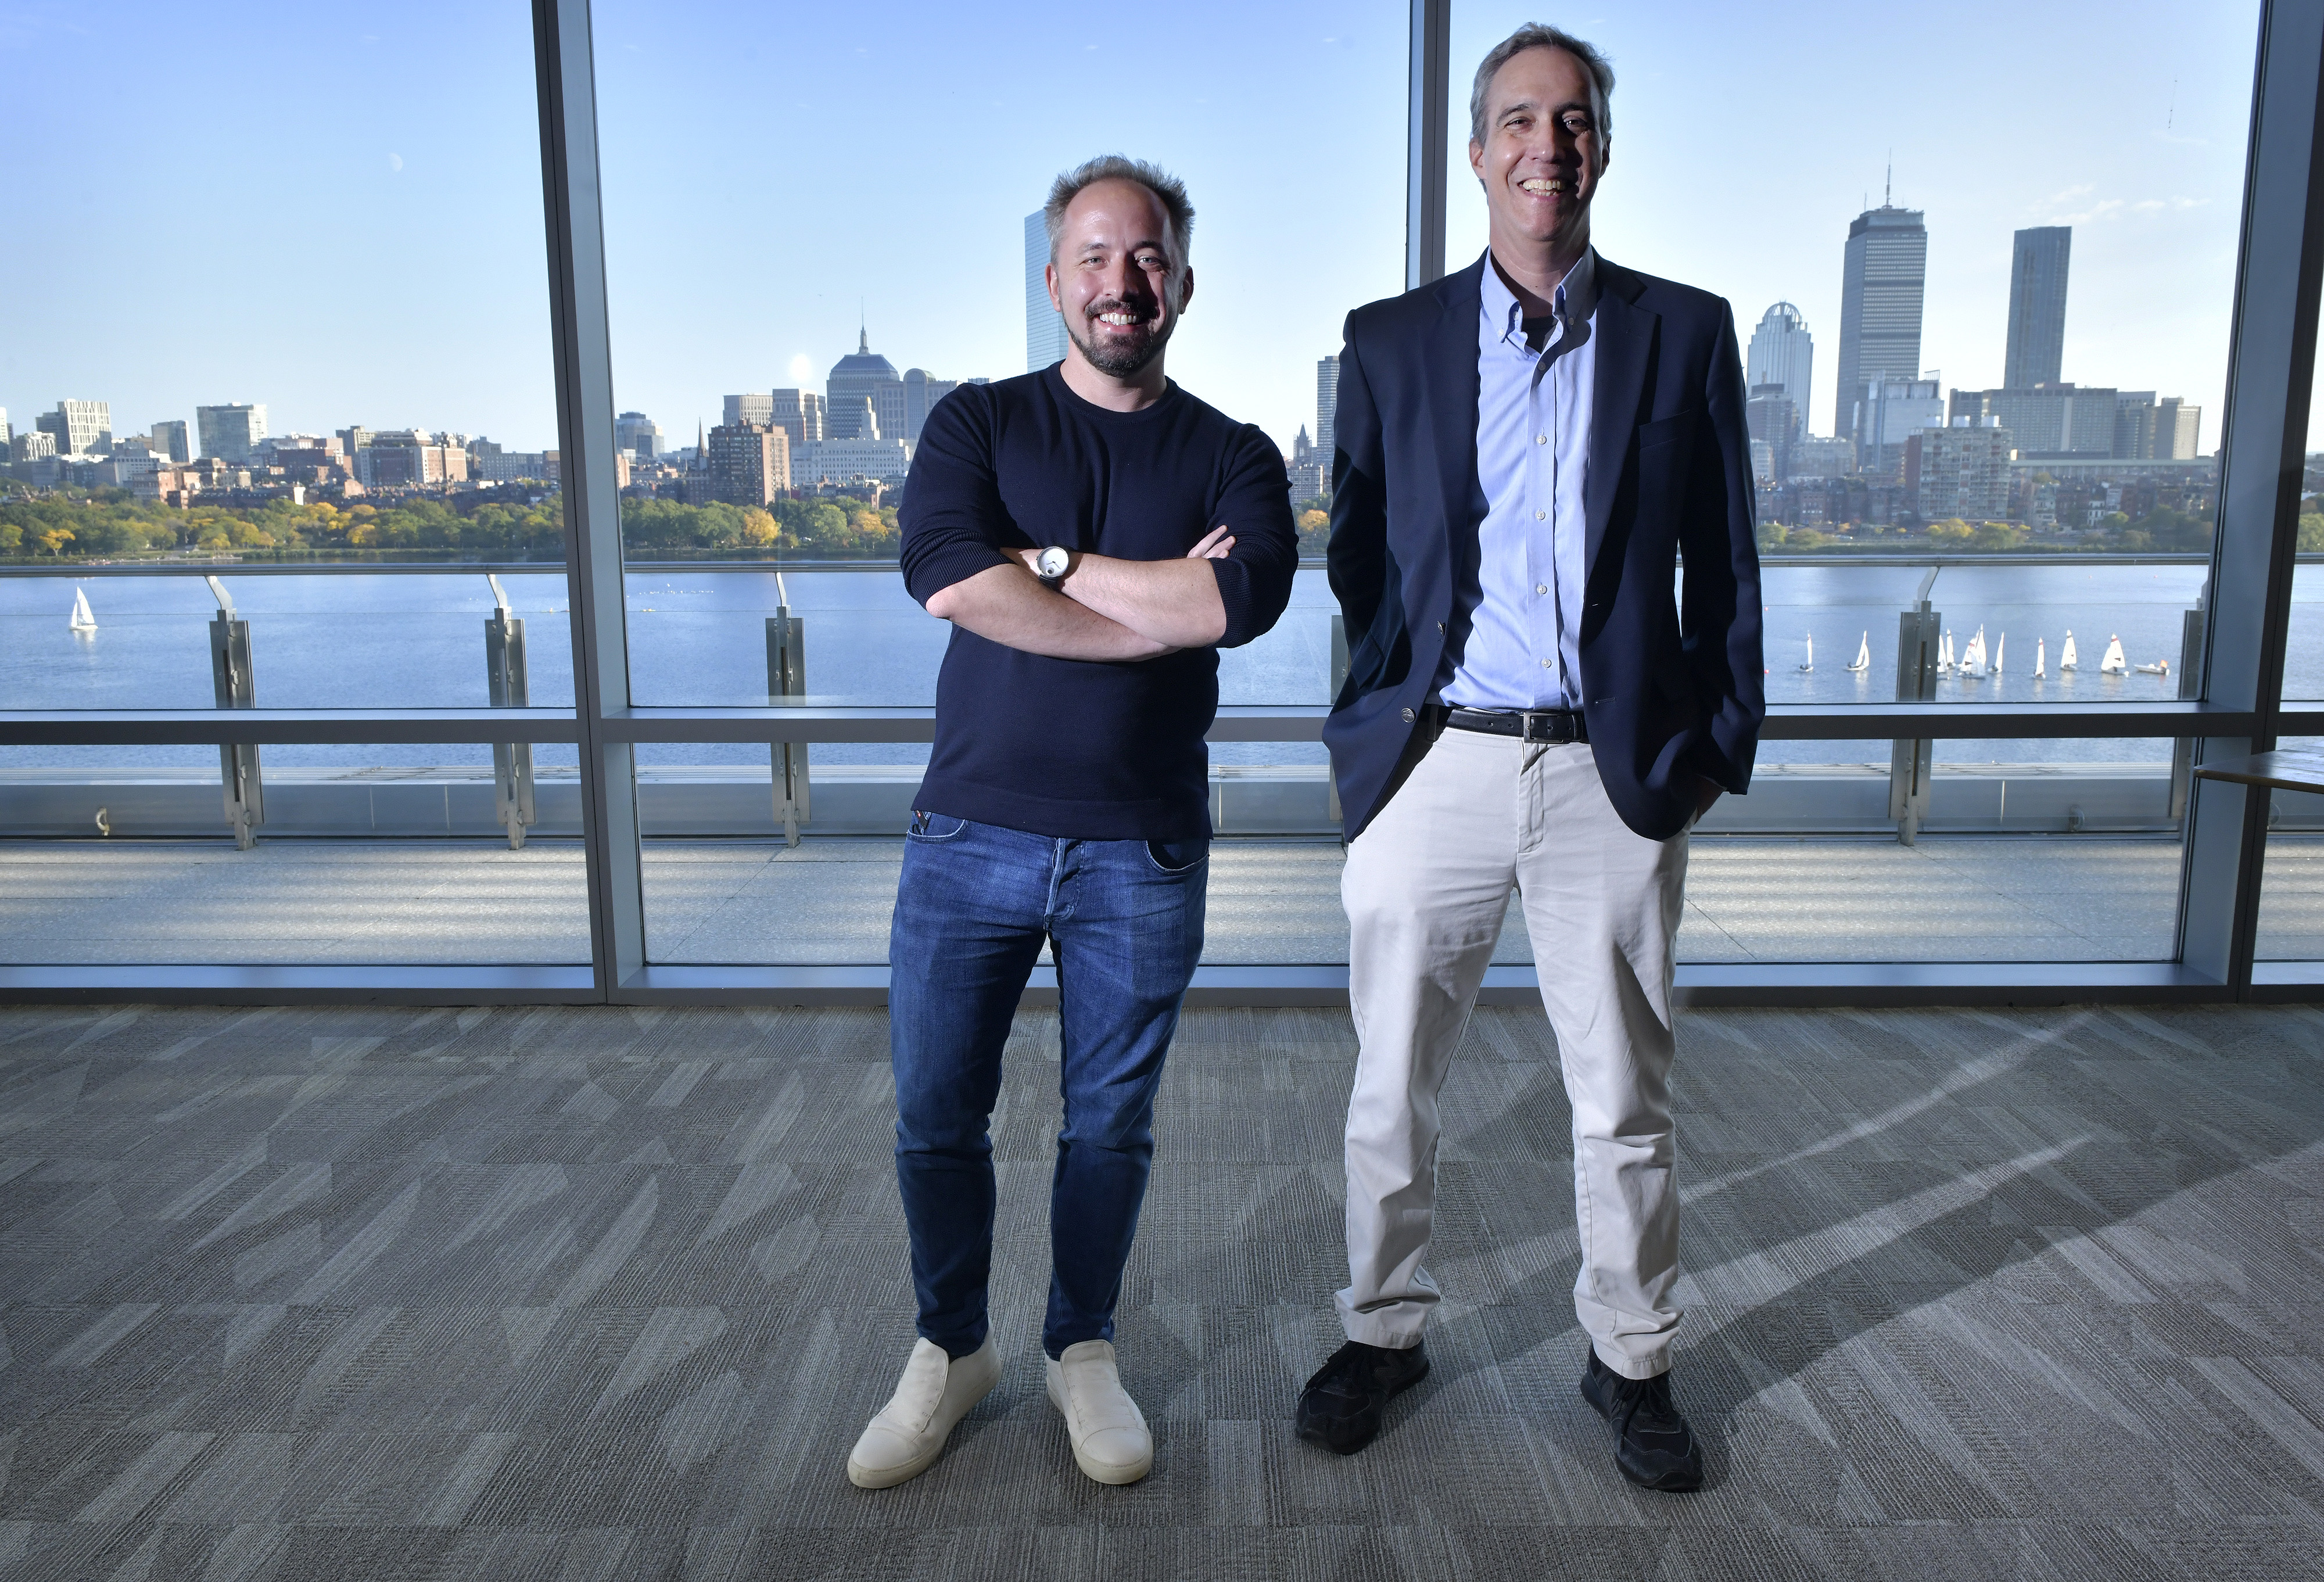 Left to right, Dropbox CEO and Co-Founder Drew Houston and Daniel Huttenlocher, Dean of MIT Schwarzman College of Computing, in an interview at MIT's Samberg Conference Center. 